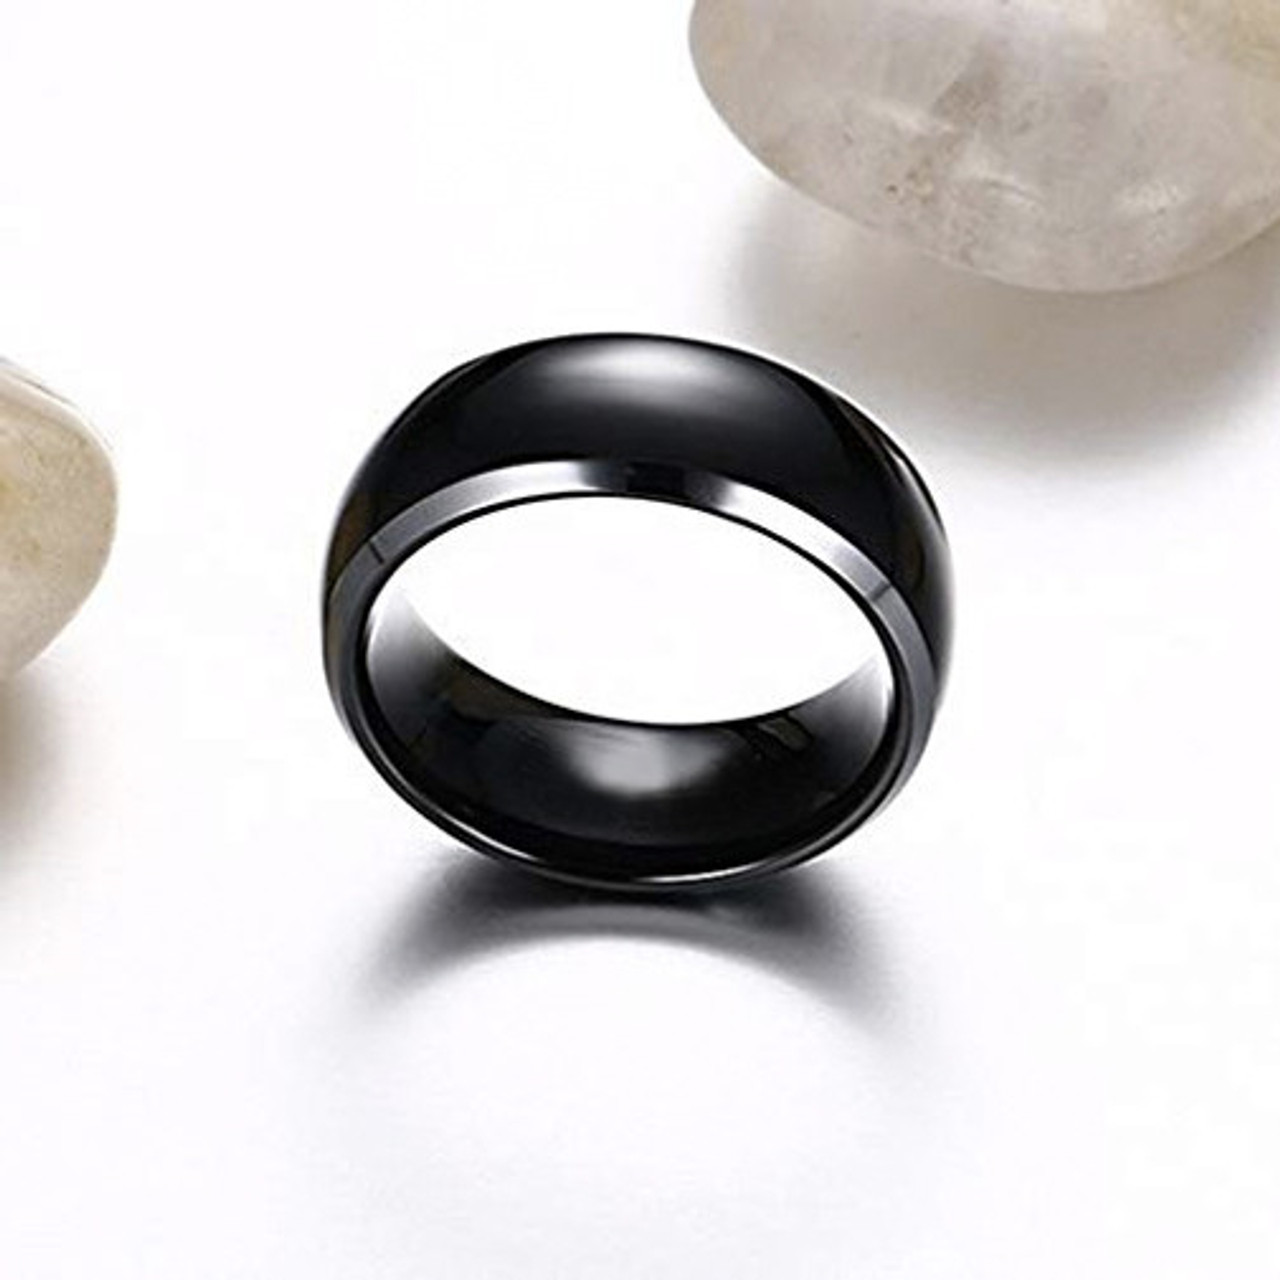 8mm - Men's or Unisex Black and Silver Two Tone Titanium Wedding Bands. High Polish Finish - Comfort Fit Ring is Light Weight